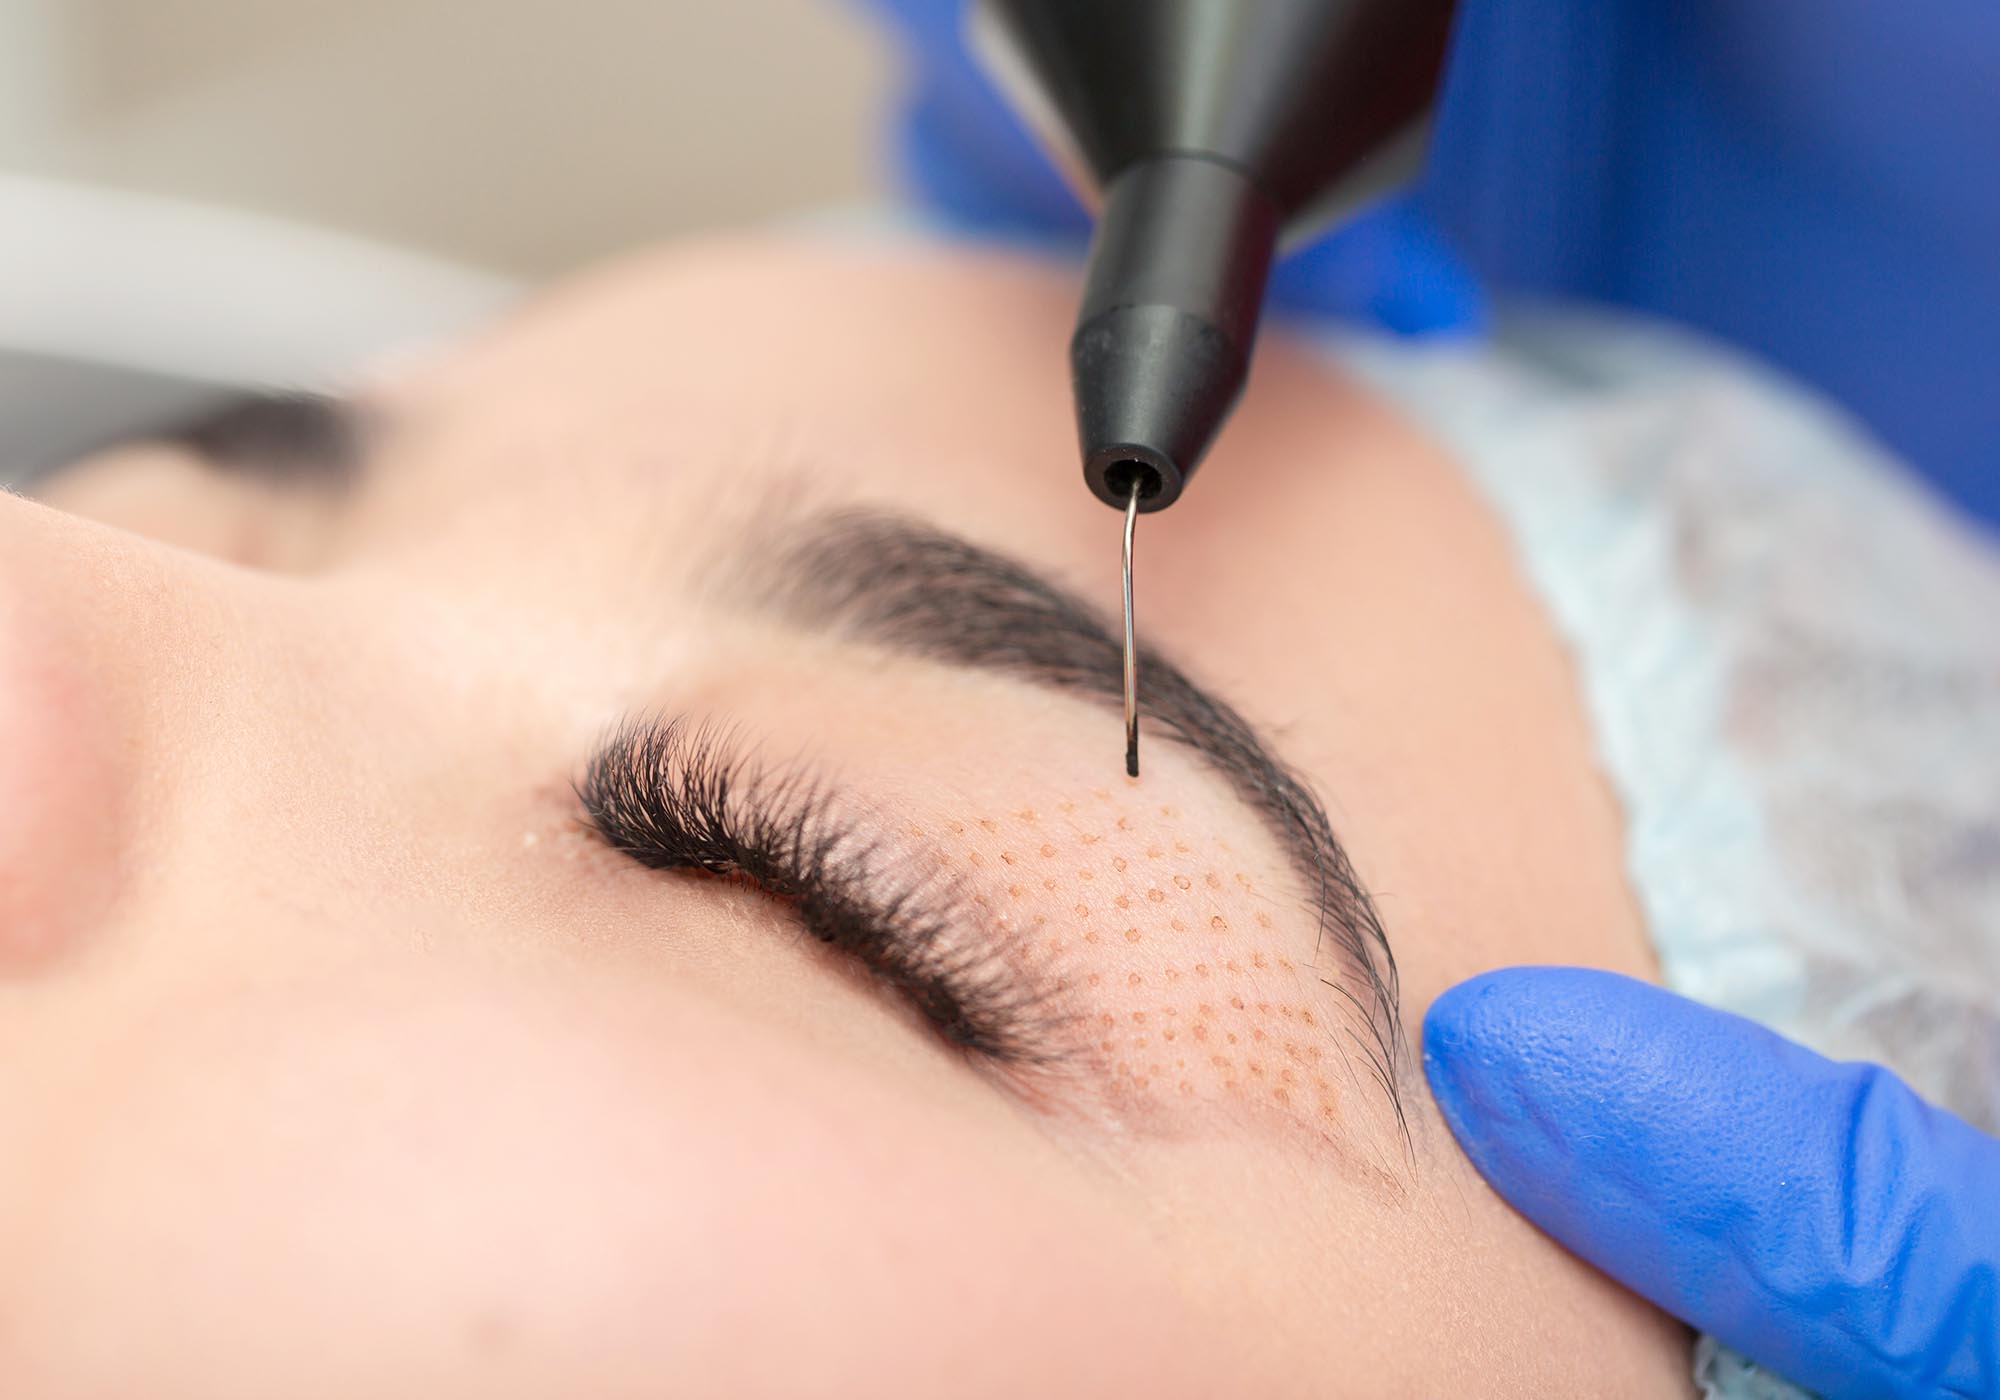 Want an Eye Lift Without Surgery? Here's How